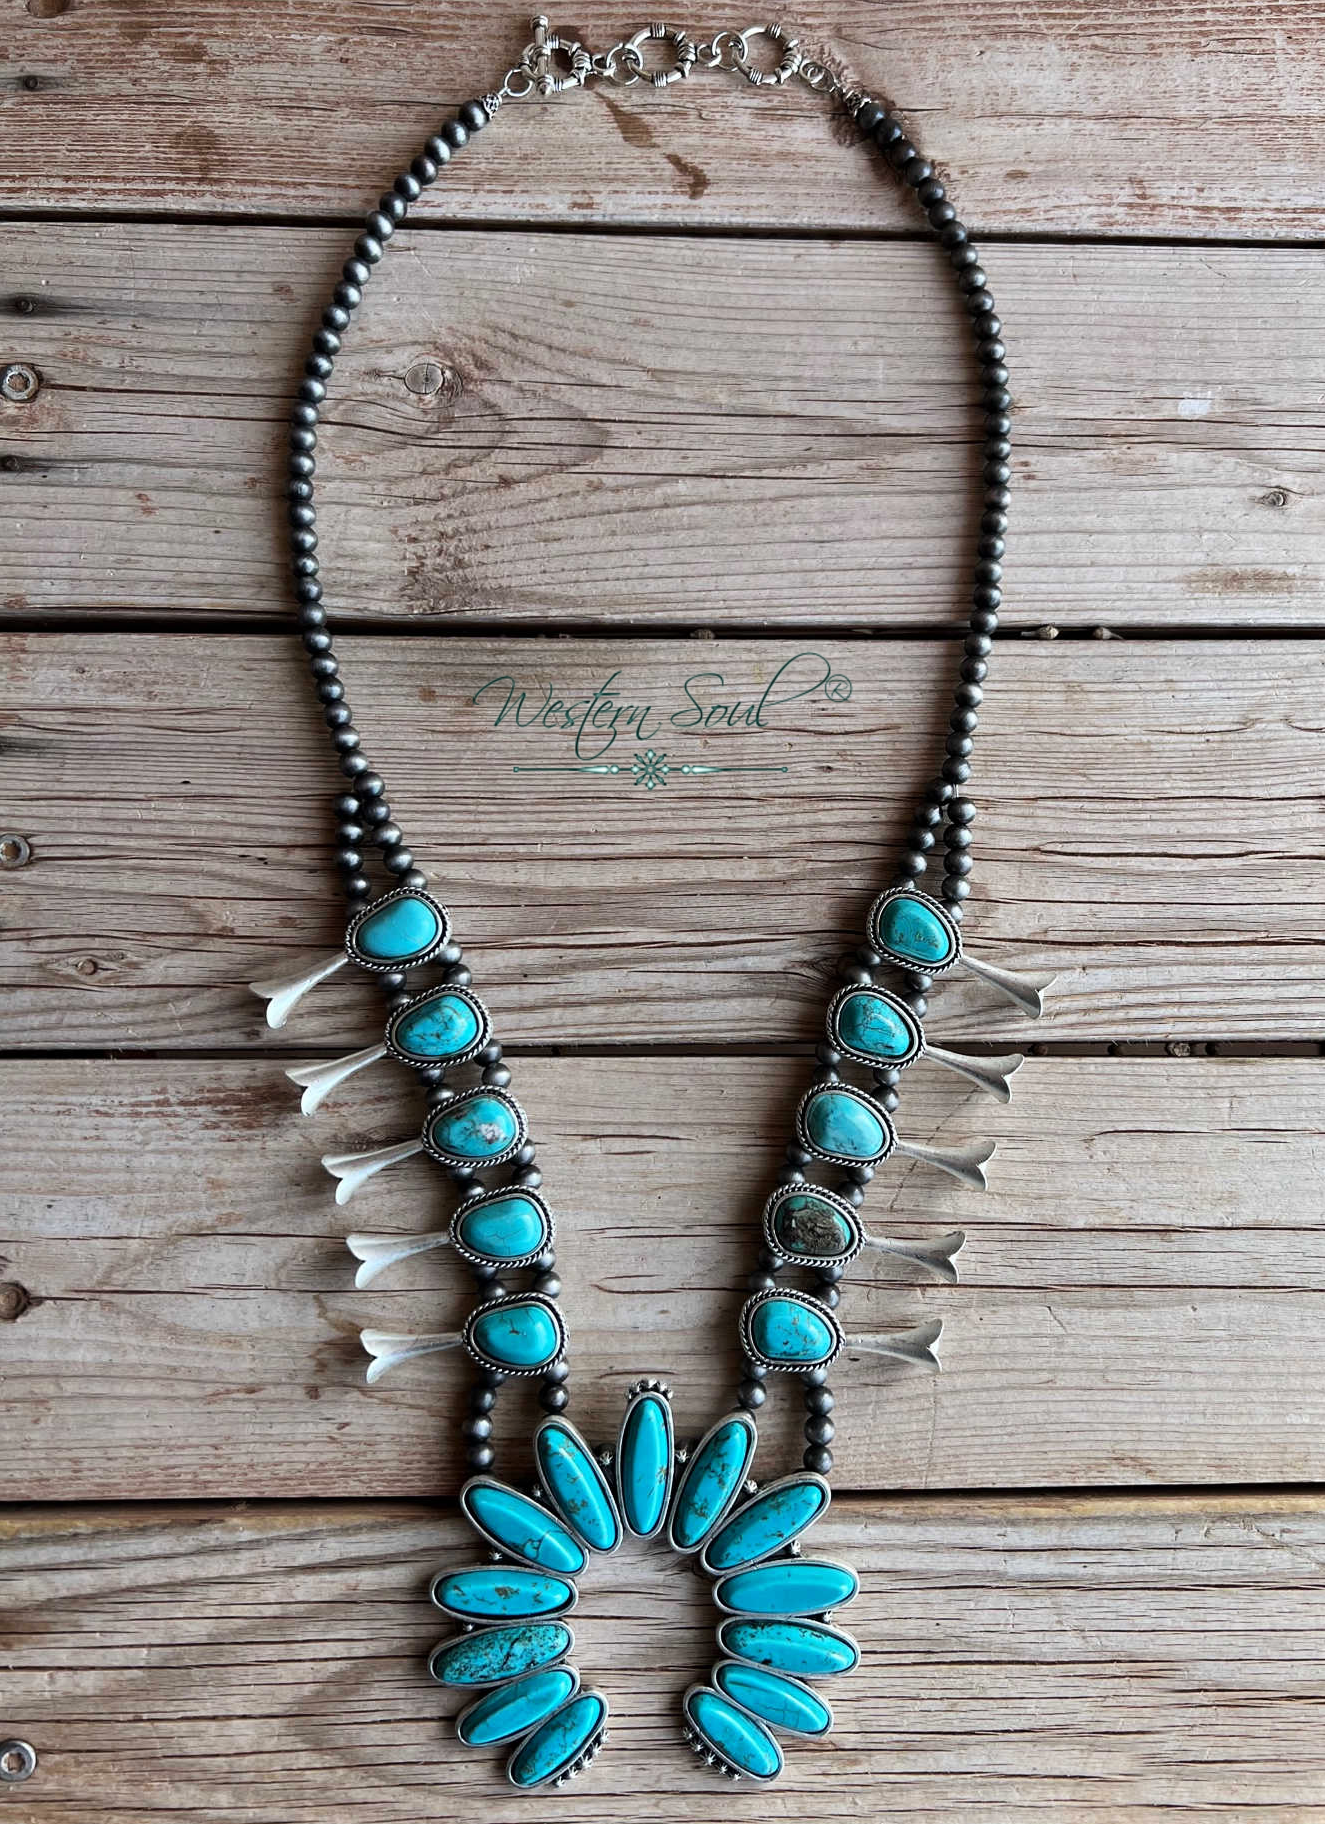 Western Necklace  Navajo Road Squash Blossom Necklace from Blue Tortoise